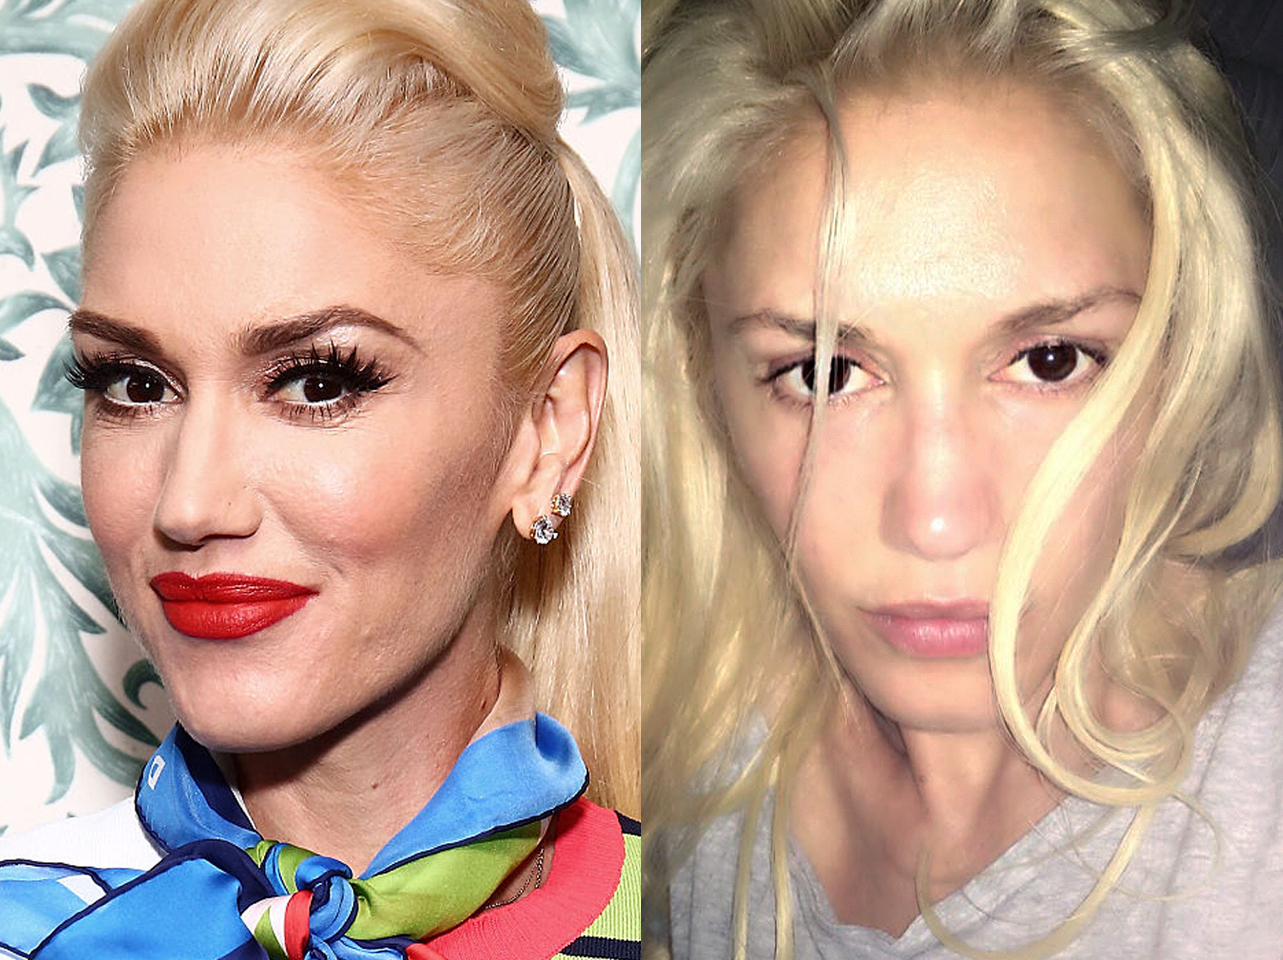 Gwen Stefani with makeup vs without makeup | Source: Getty Images | Instagram/gwenstefani